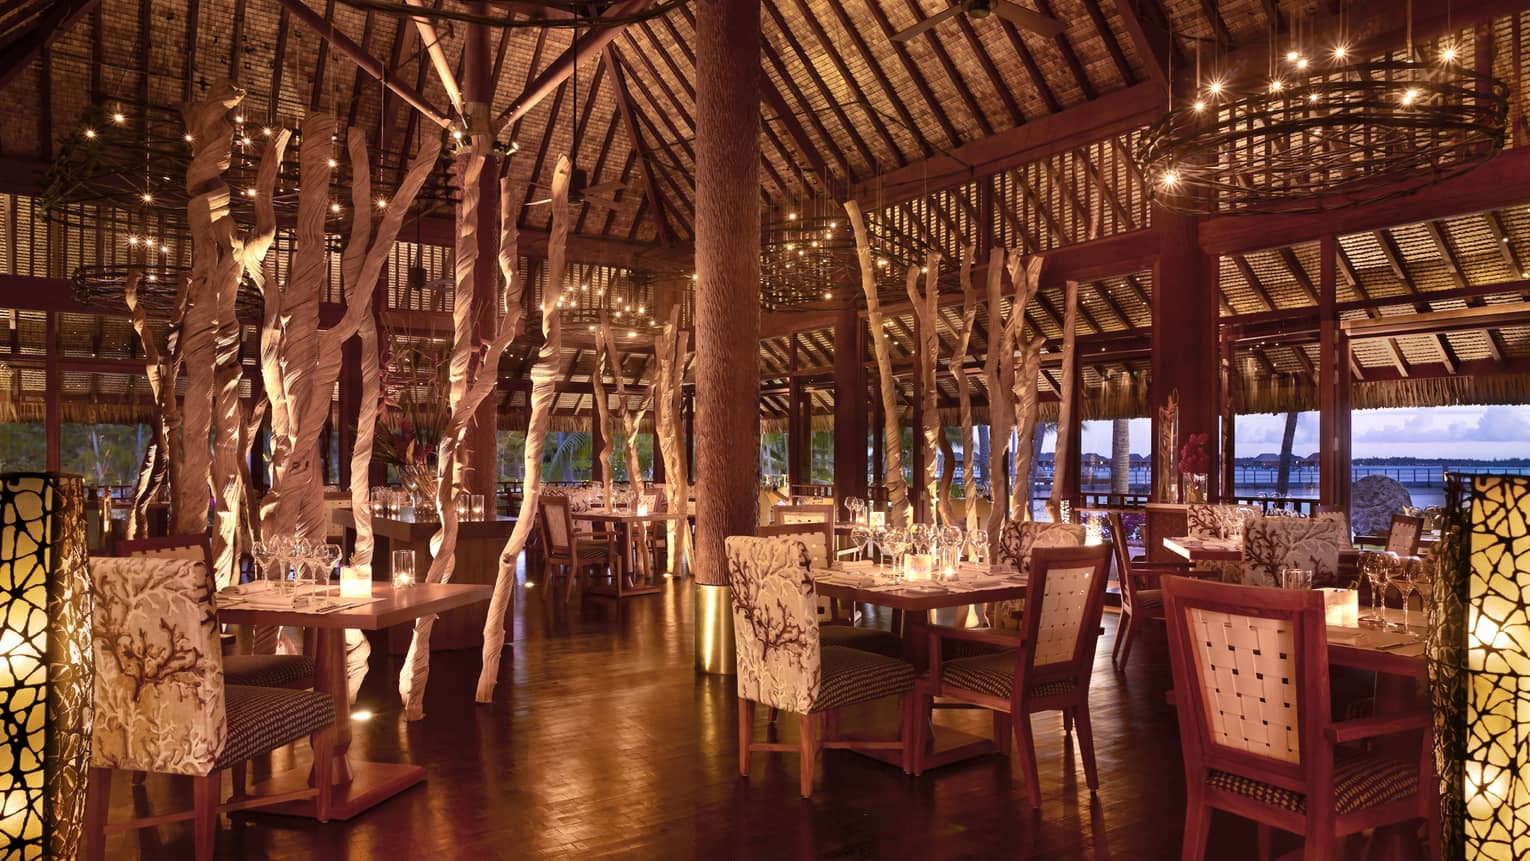 Elegant, candle-lit Arii Moana open-air dining room with plush chairs, decorative branches 